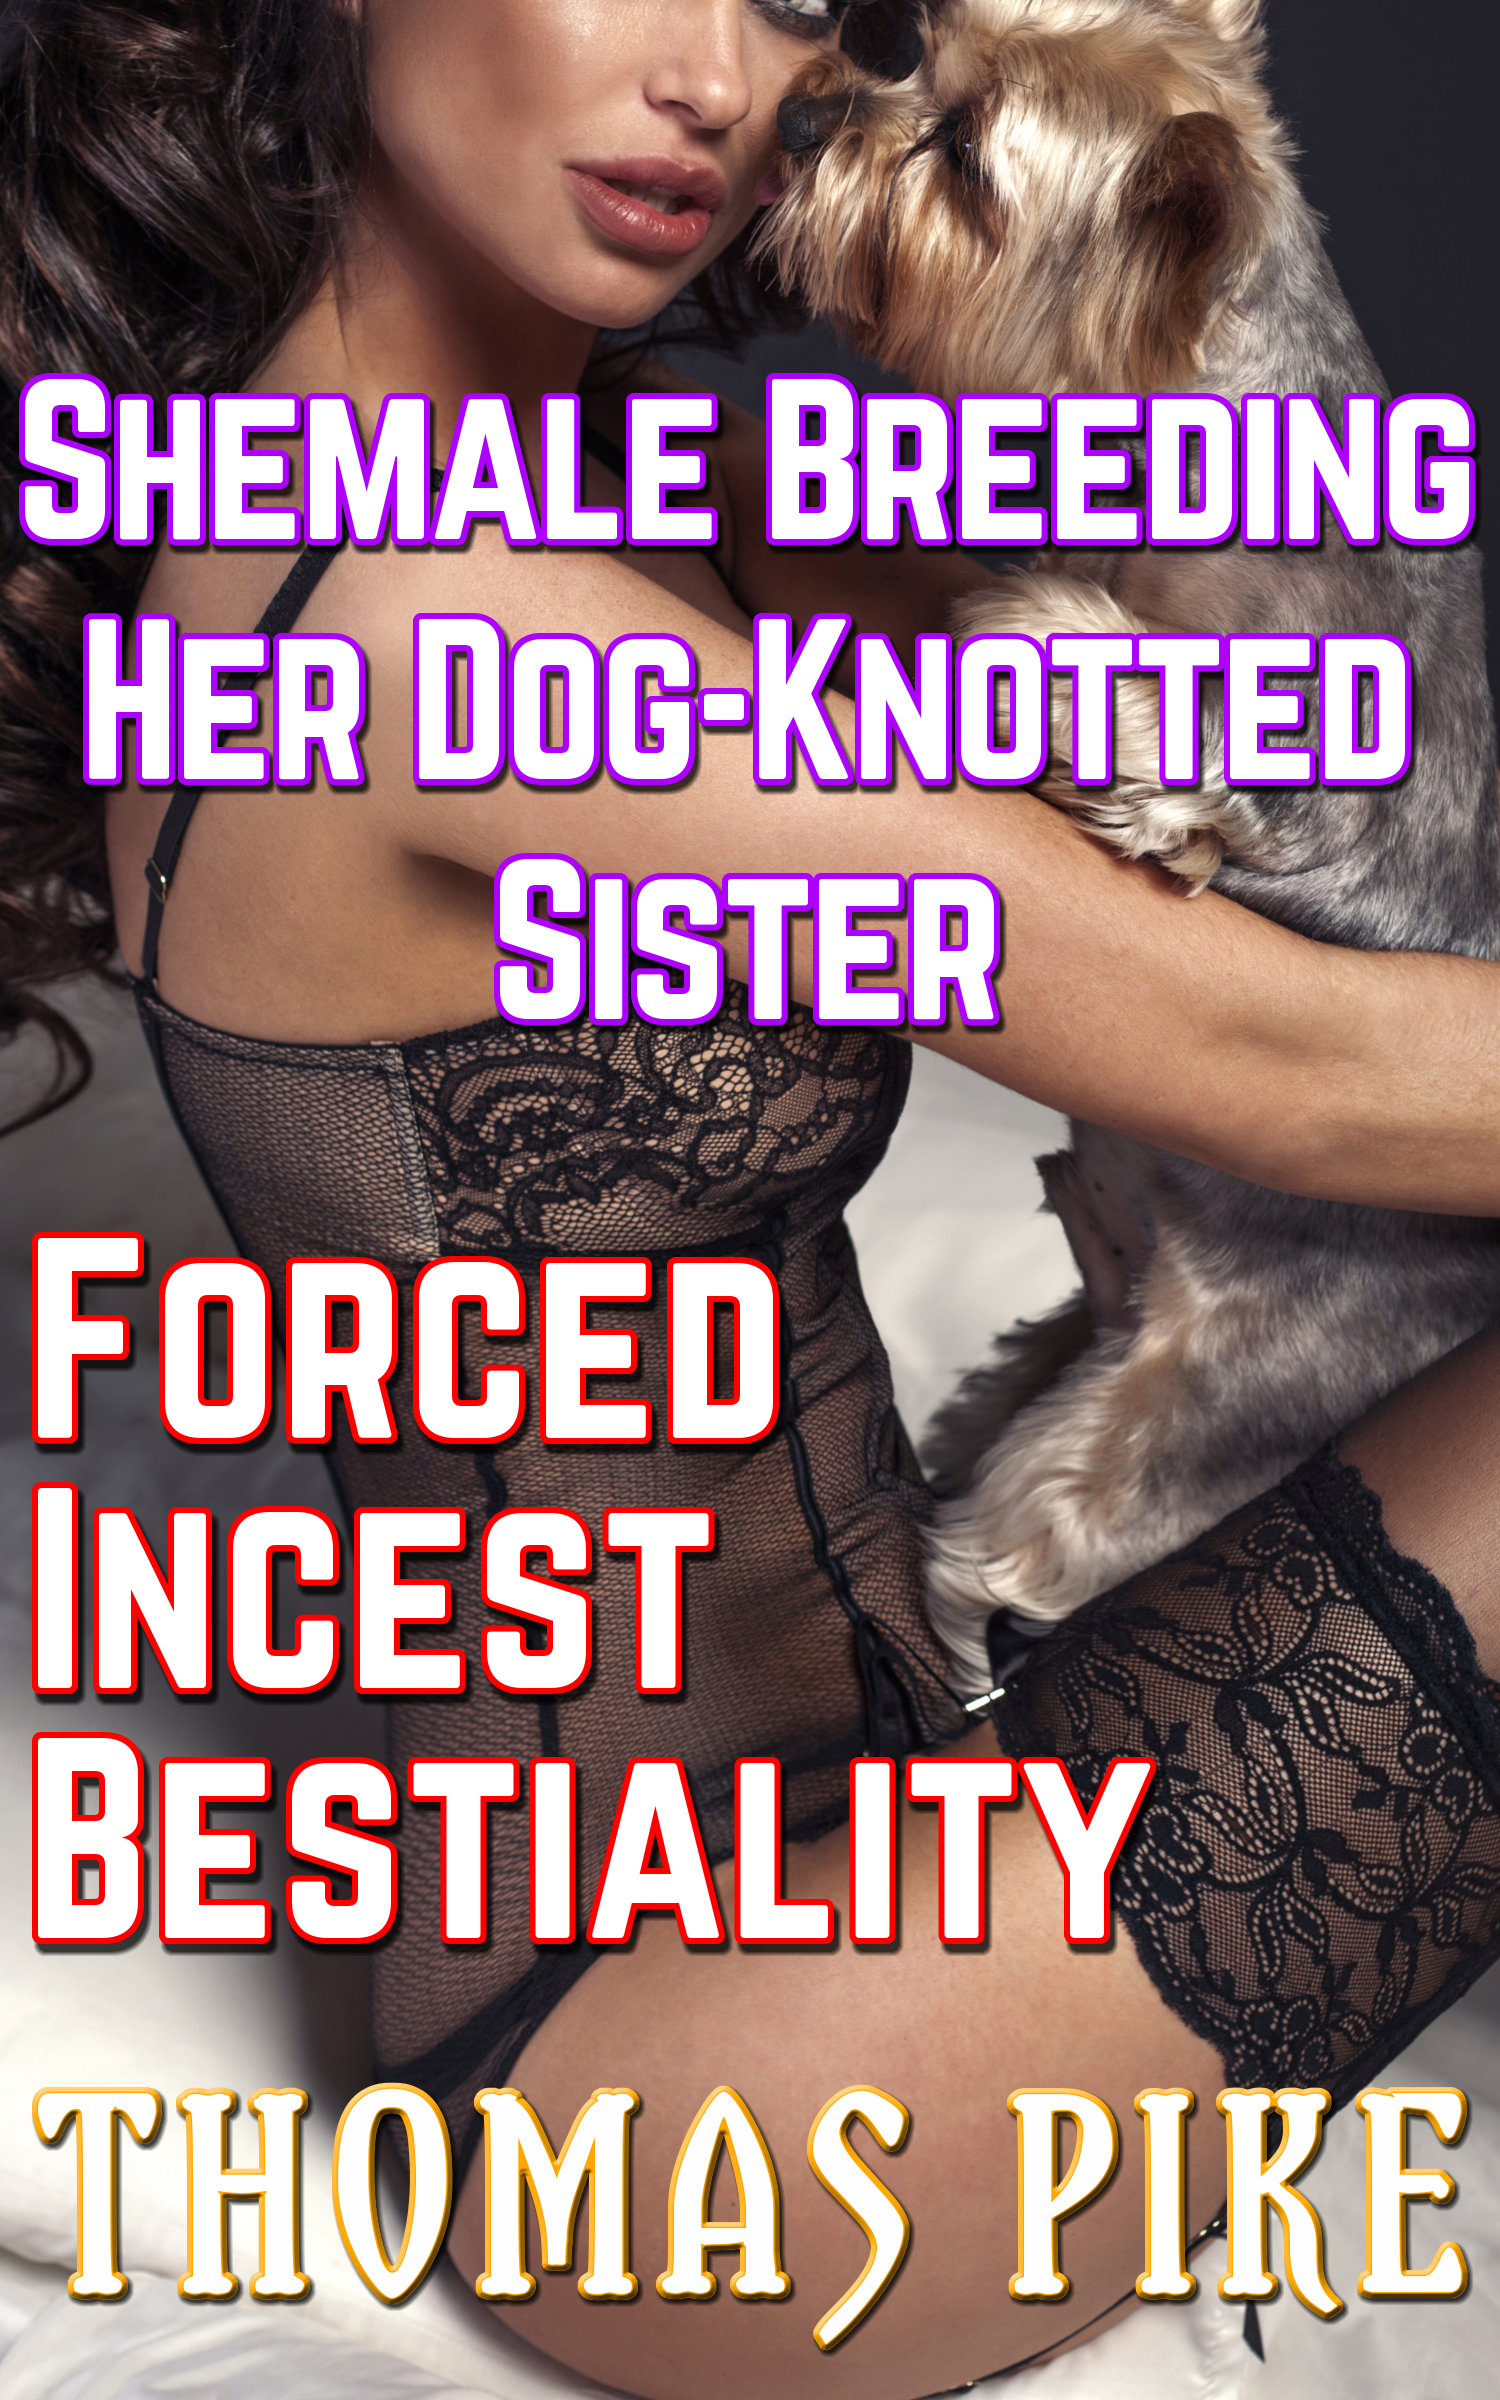 Smashwords â€“ Shemale Breeding Her Dog-Knotted Sister (Virgin Dickgirl  Forced Lesbian Incest Bestiality) â€“ a book by Thomas Pike